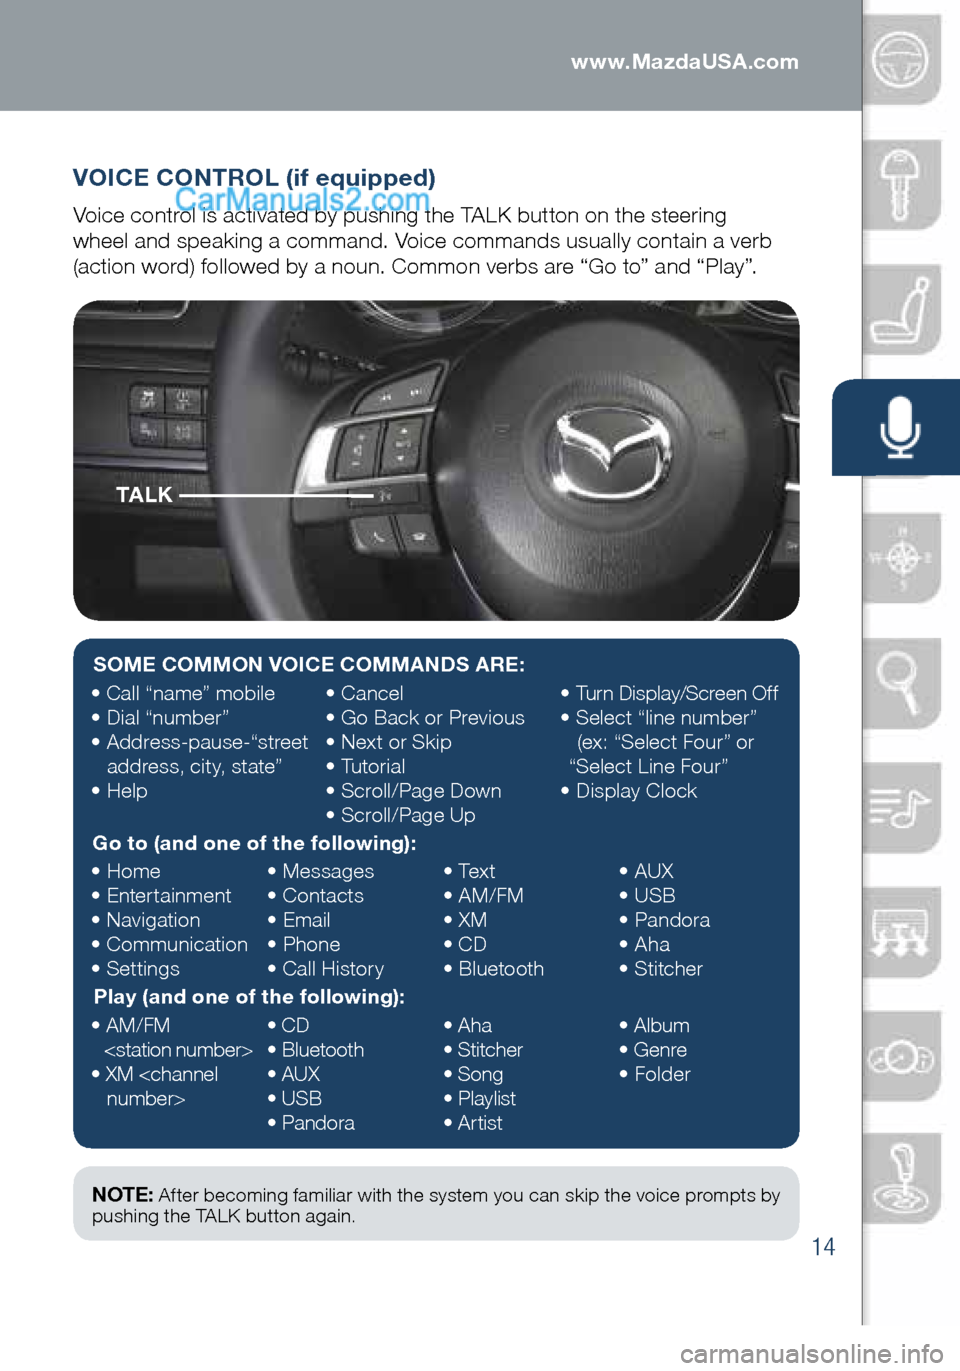 MAZDA MODEL CX-5 2016  Smart Start Guide (in English) 14
VOICE CONTROL (if equipped)
Voice control is activated by pushing the TALK button on the steering   
wheel and speaking a command. Voice commands usually contain a verb 
(action word) followed by a